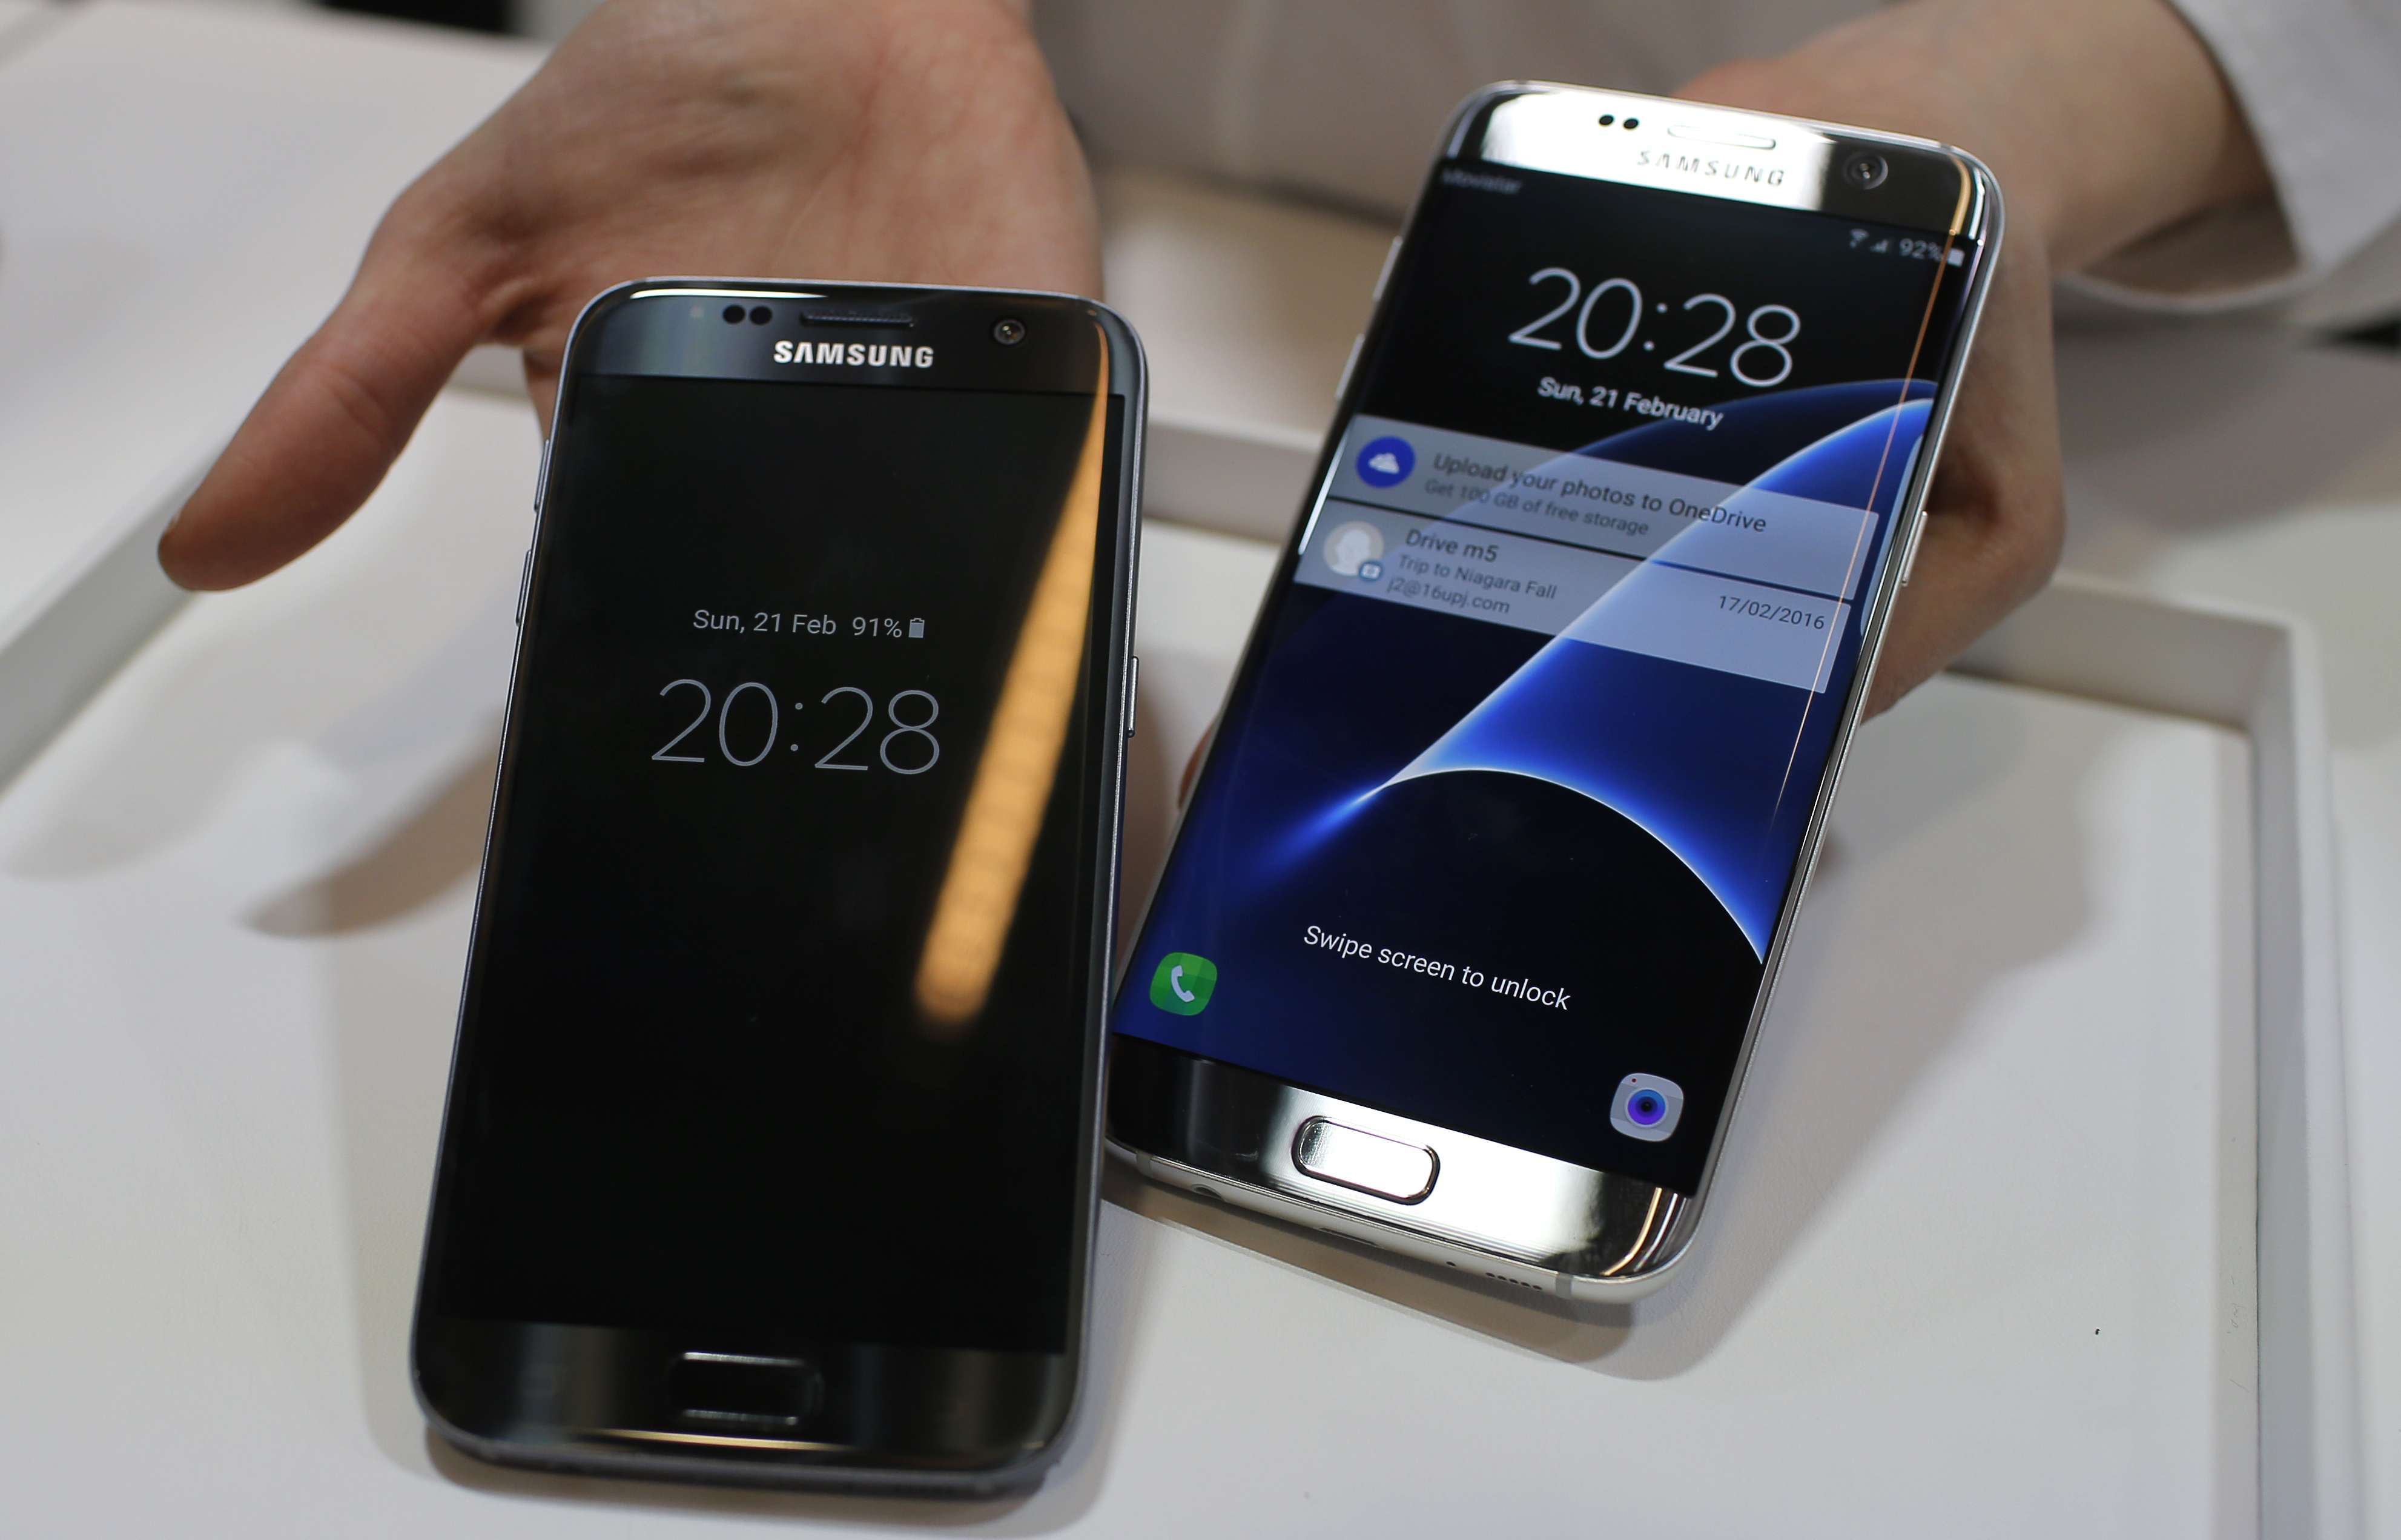 The Samsung Galaxy S7 (left) and S7 Edge displayed during the Samsung Galaxy Unpacked 2016 event on the eve of the Mobile World Congress wireless show, in Barcelona, Spain. Photo: AP